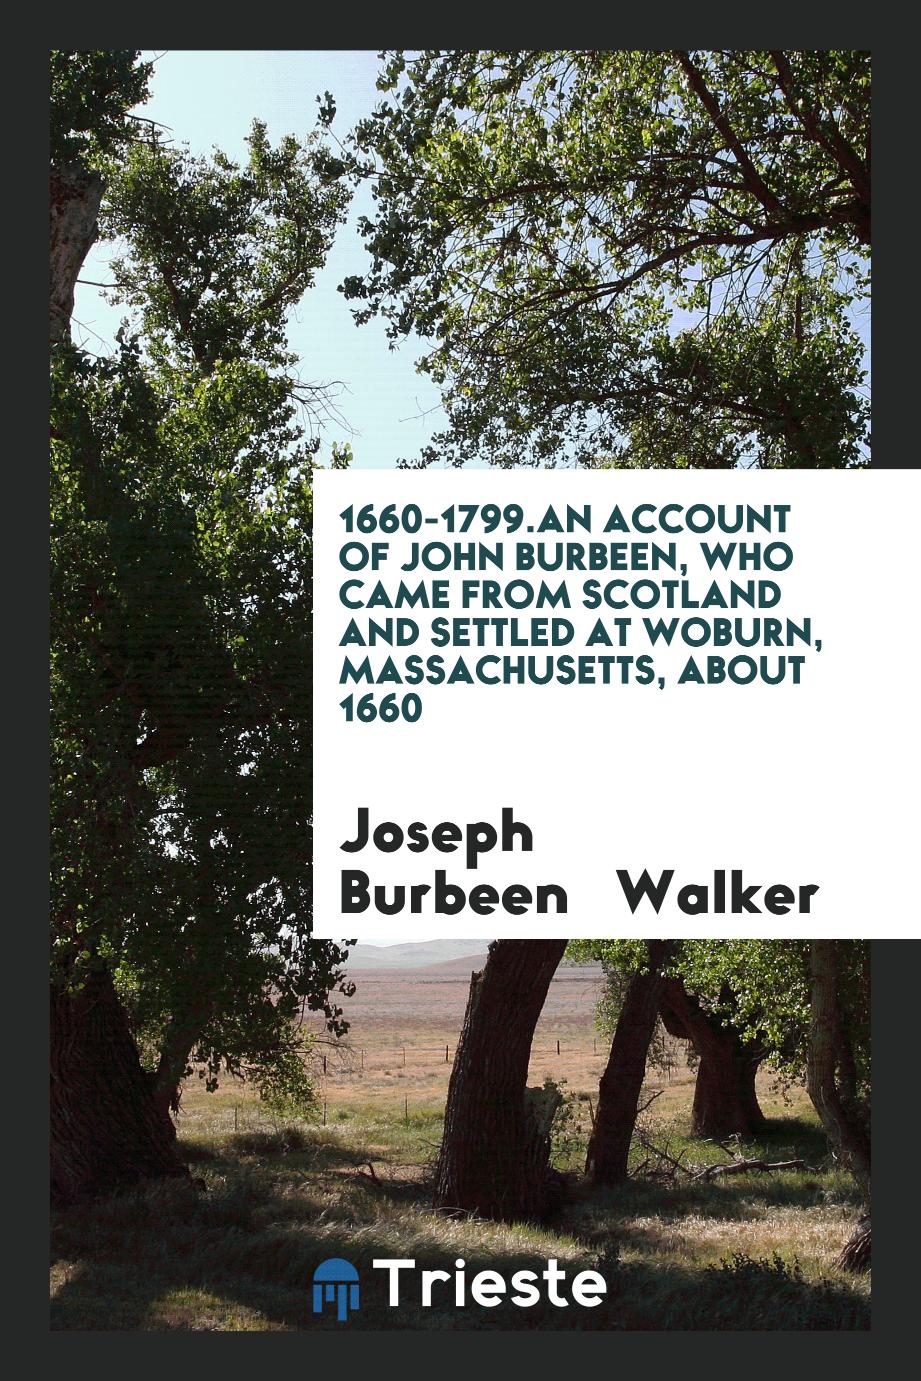 1660-1799.An Account of John Burbeen, who Came from Scotland and Settled at Woburn, Massachusetts, about 1660